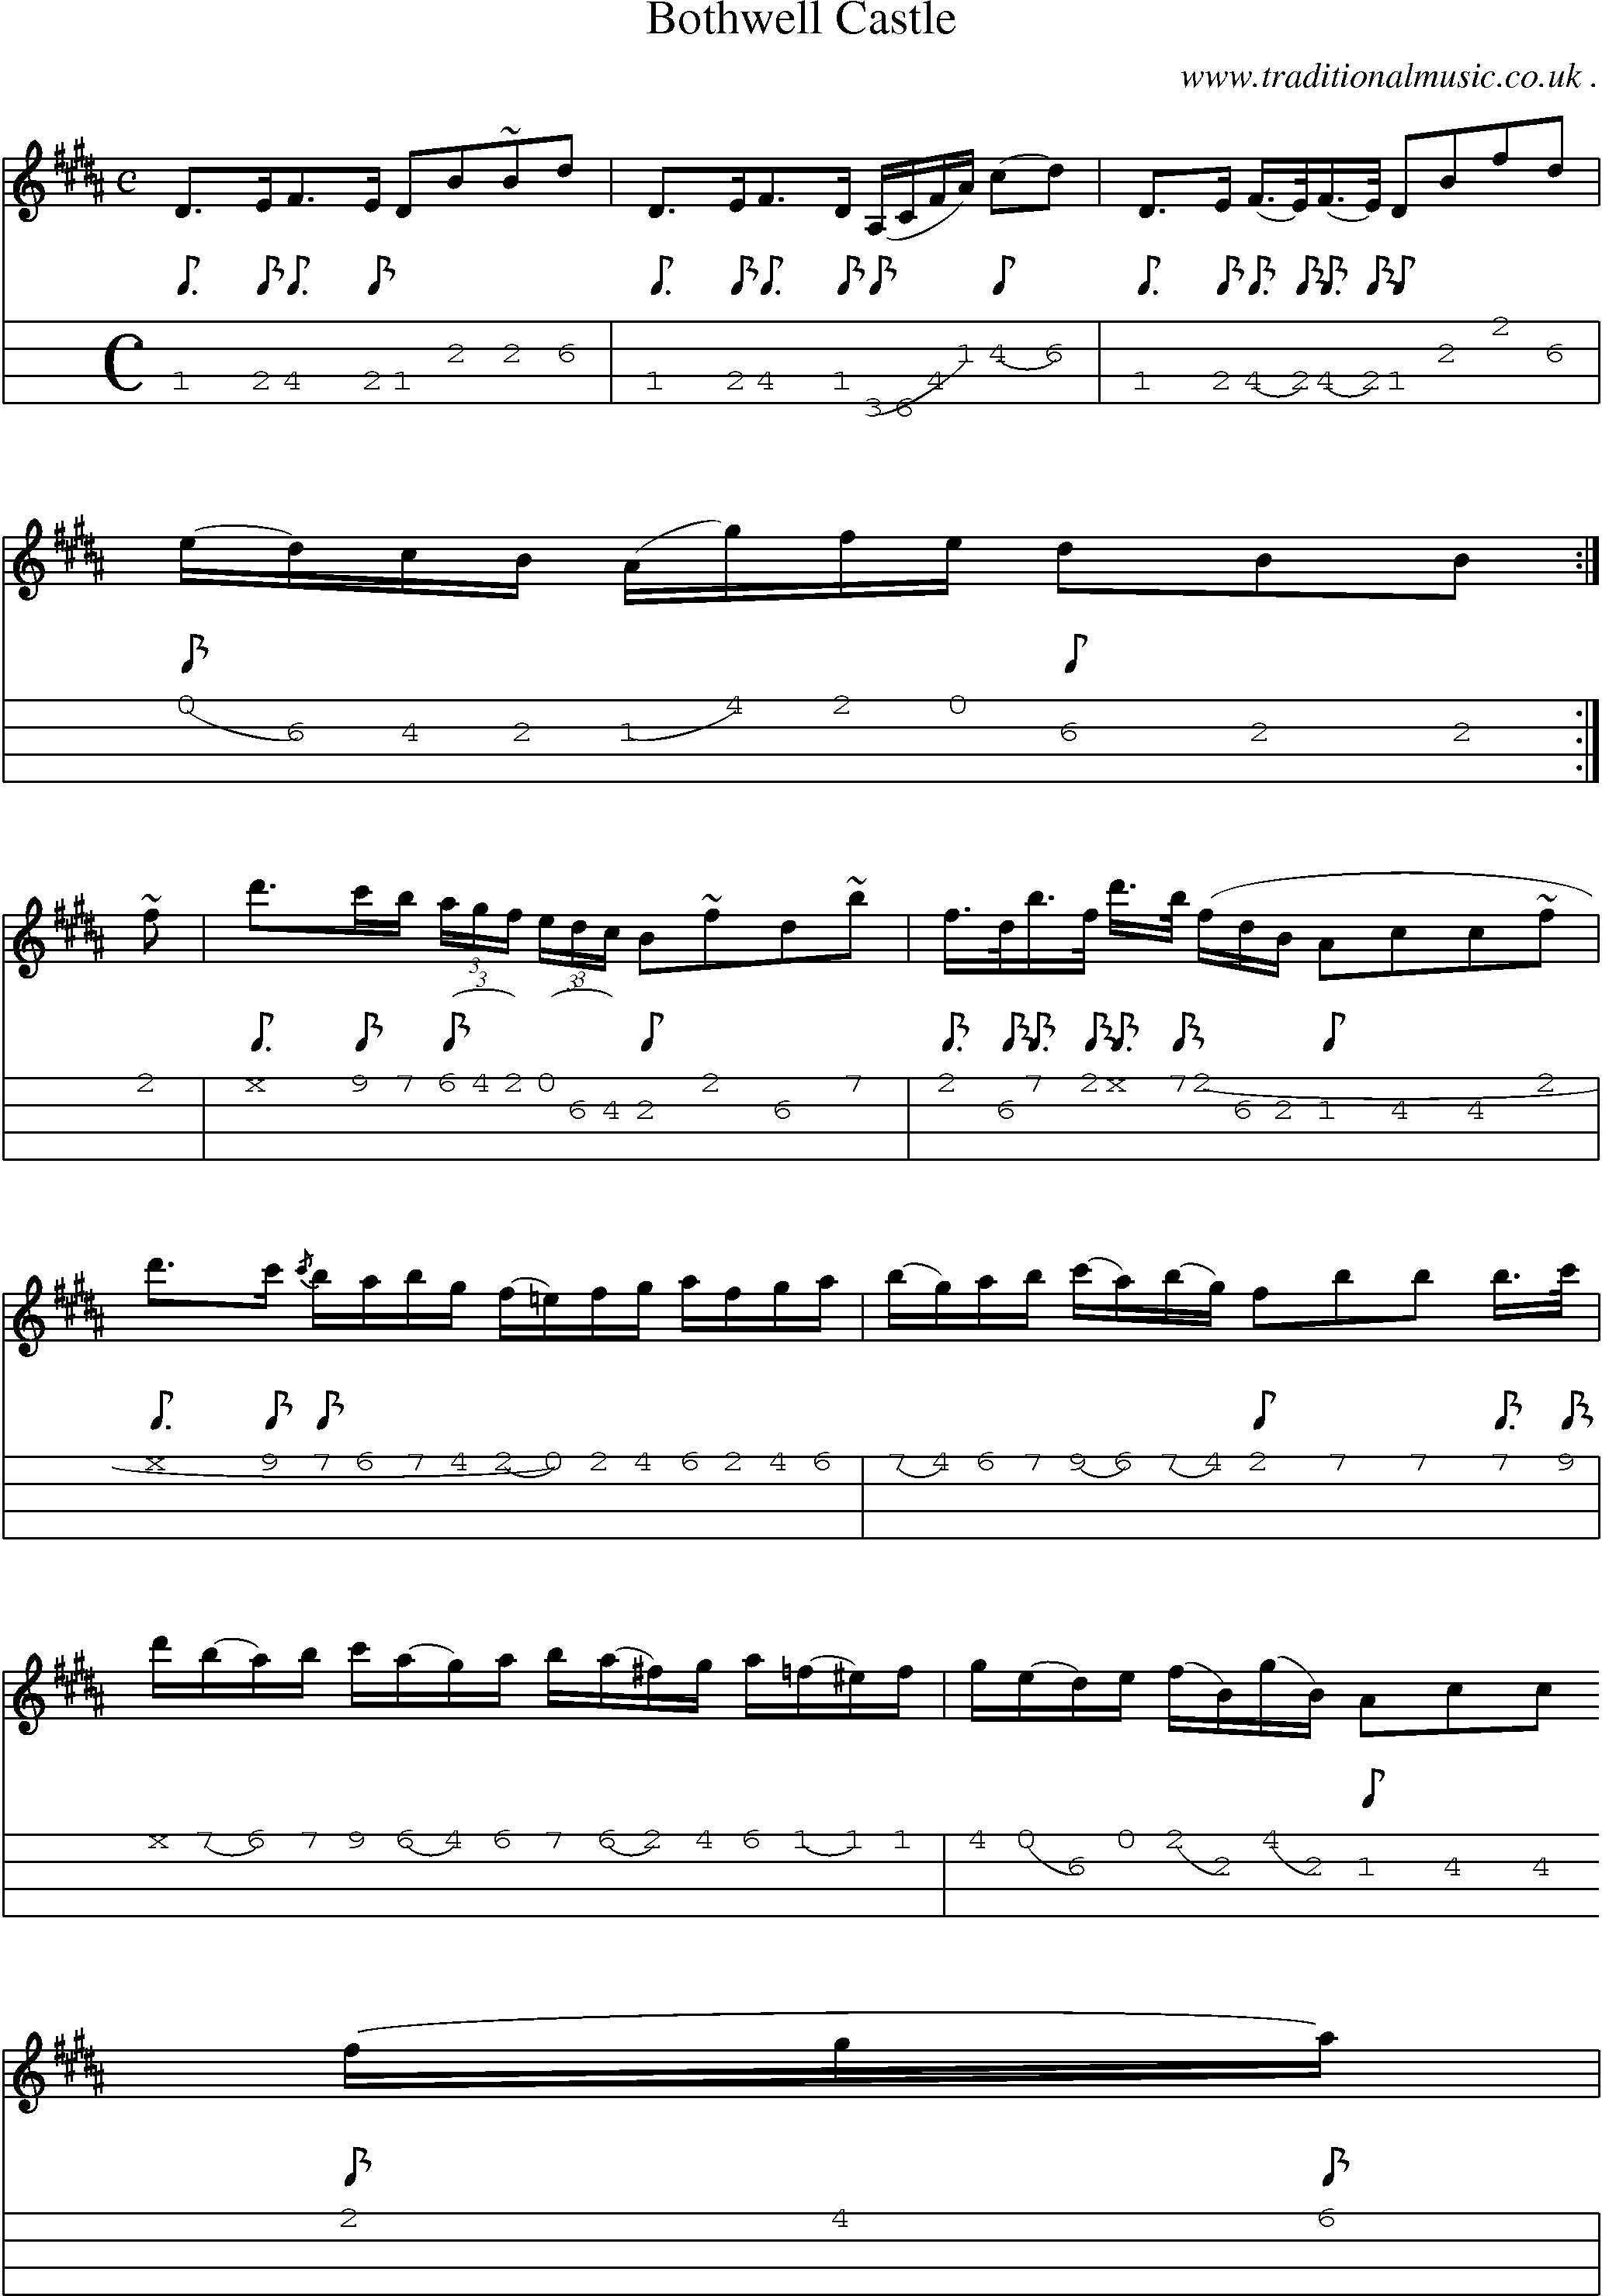 Sheet-music  score, Chords and Mandolin Tabs for Bothwell Castle